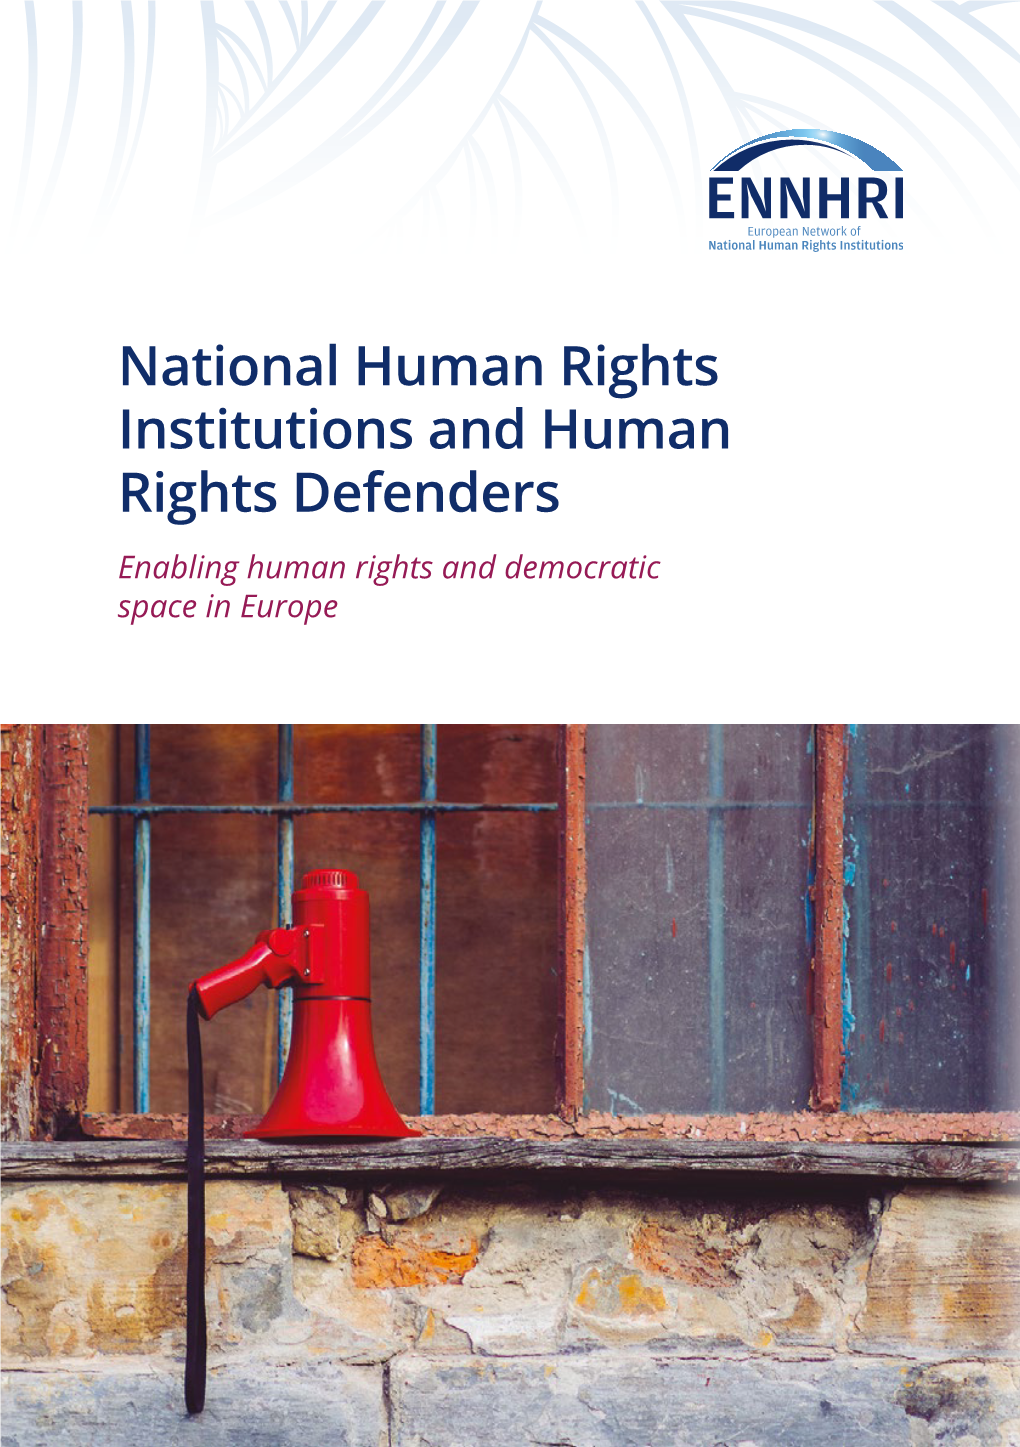 Support to Human Rights Defenders and Democratic Space